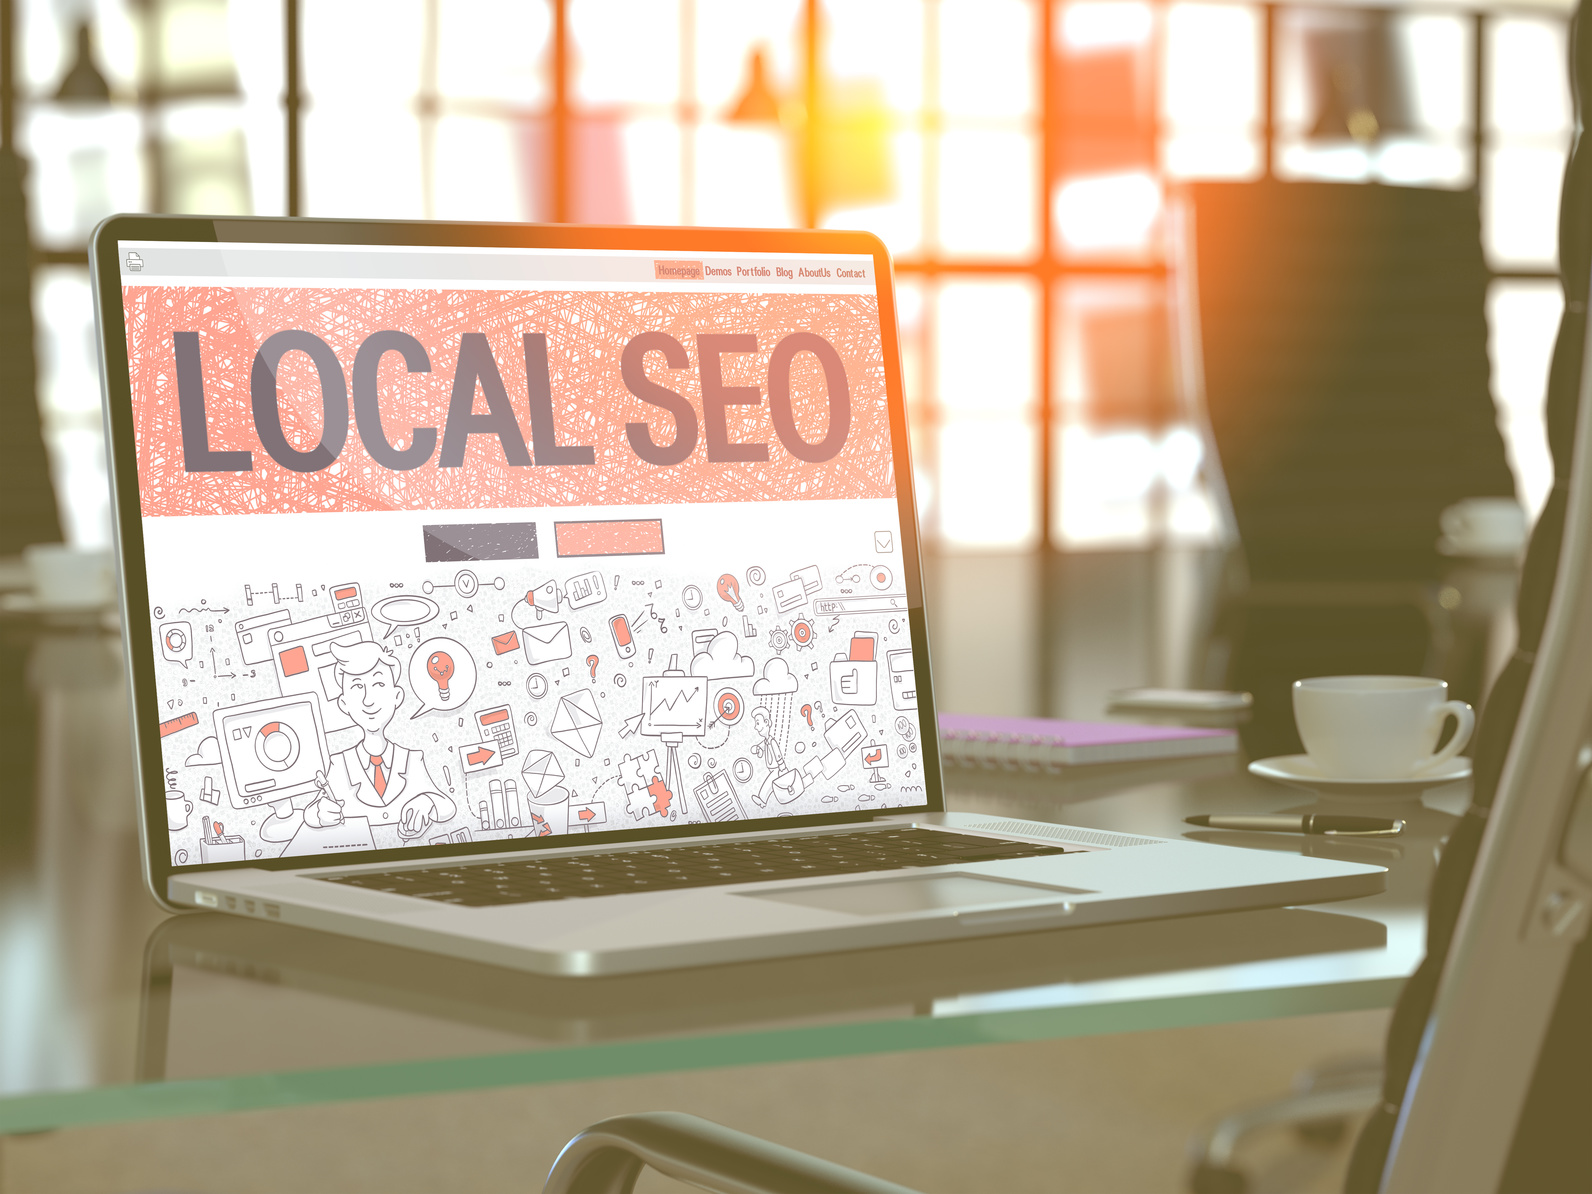 Looking for Local SEO, Here’s What You Need to Know